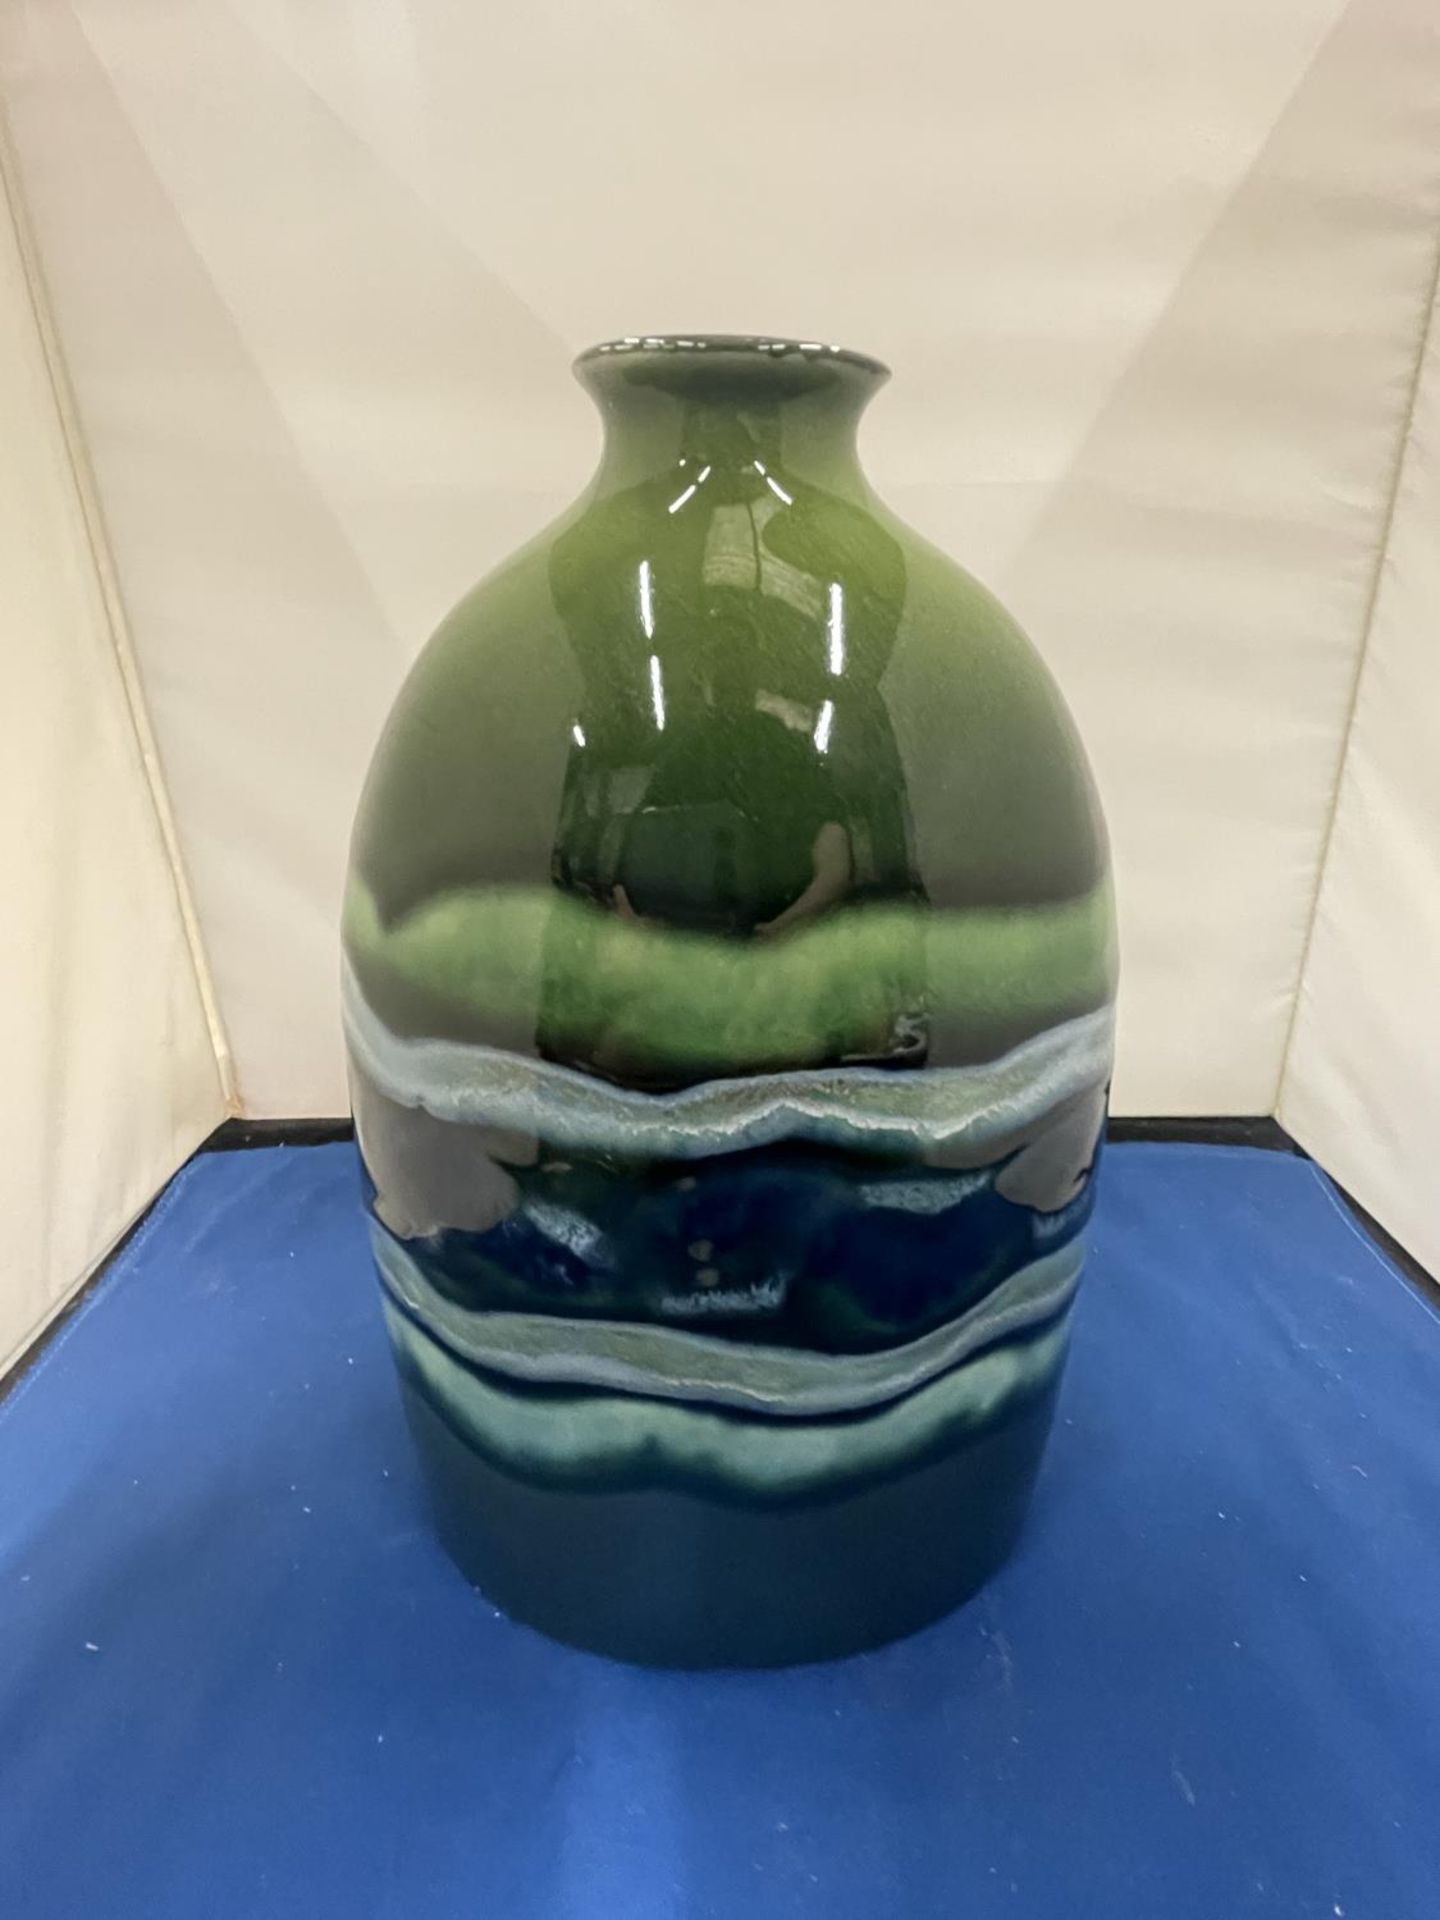 A POOLE POTTERY BOTTLE VASE MAYA DESIGN WITH ORIGINAL BOX 23CM TALL - Image 4 of 12